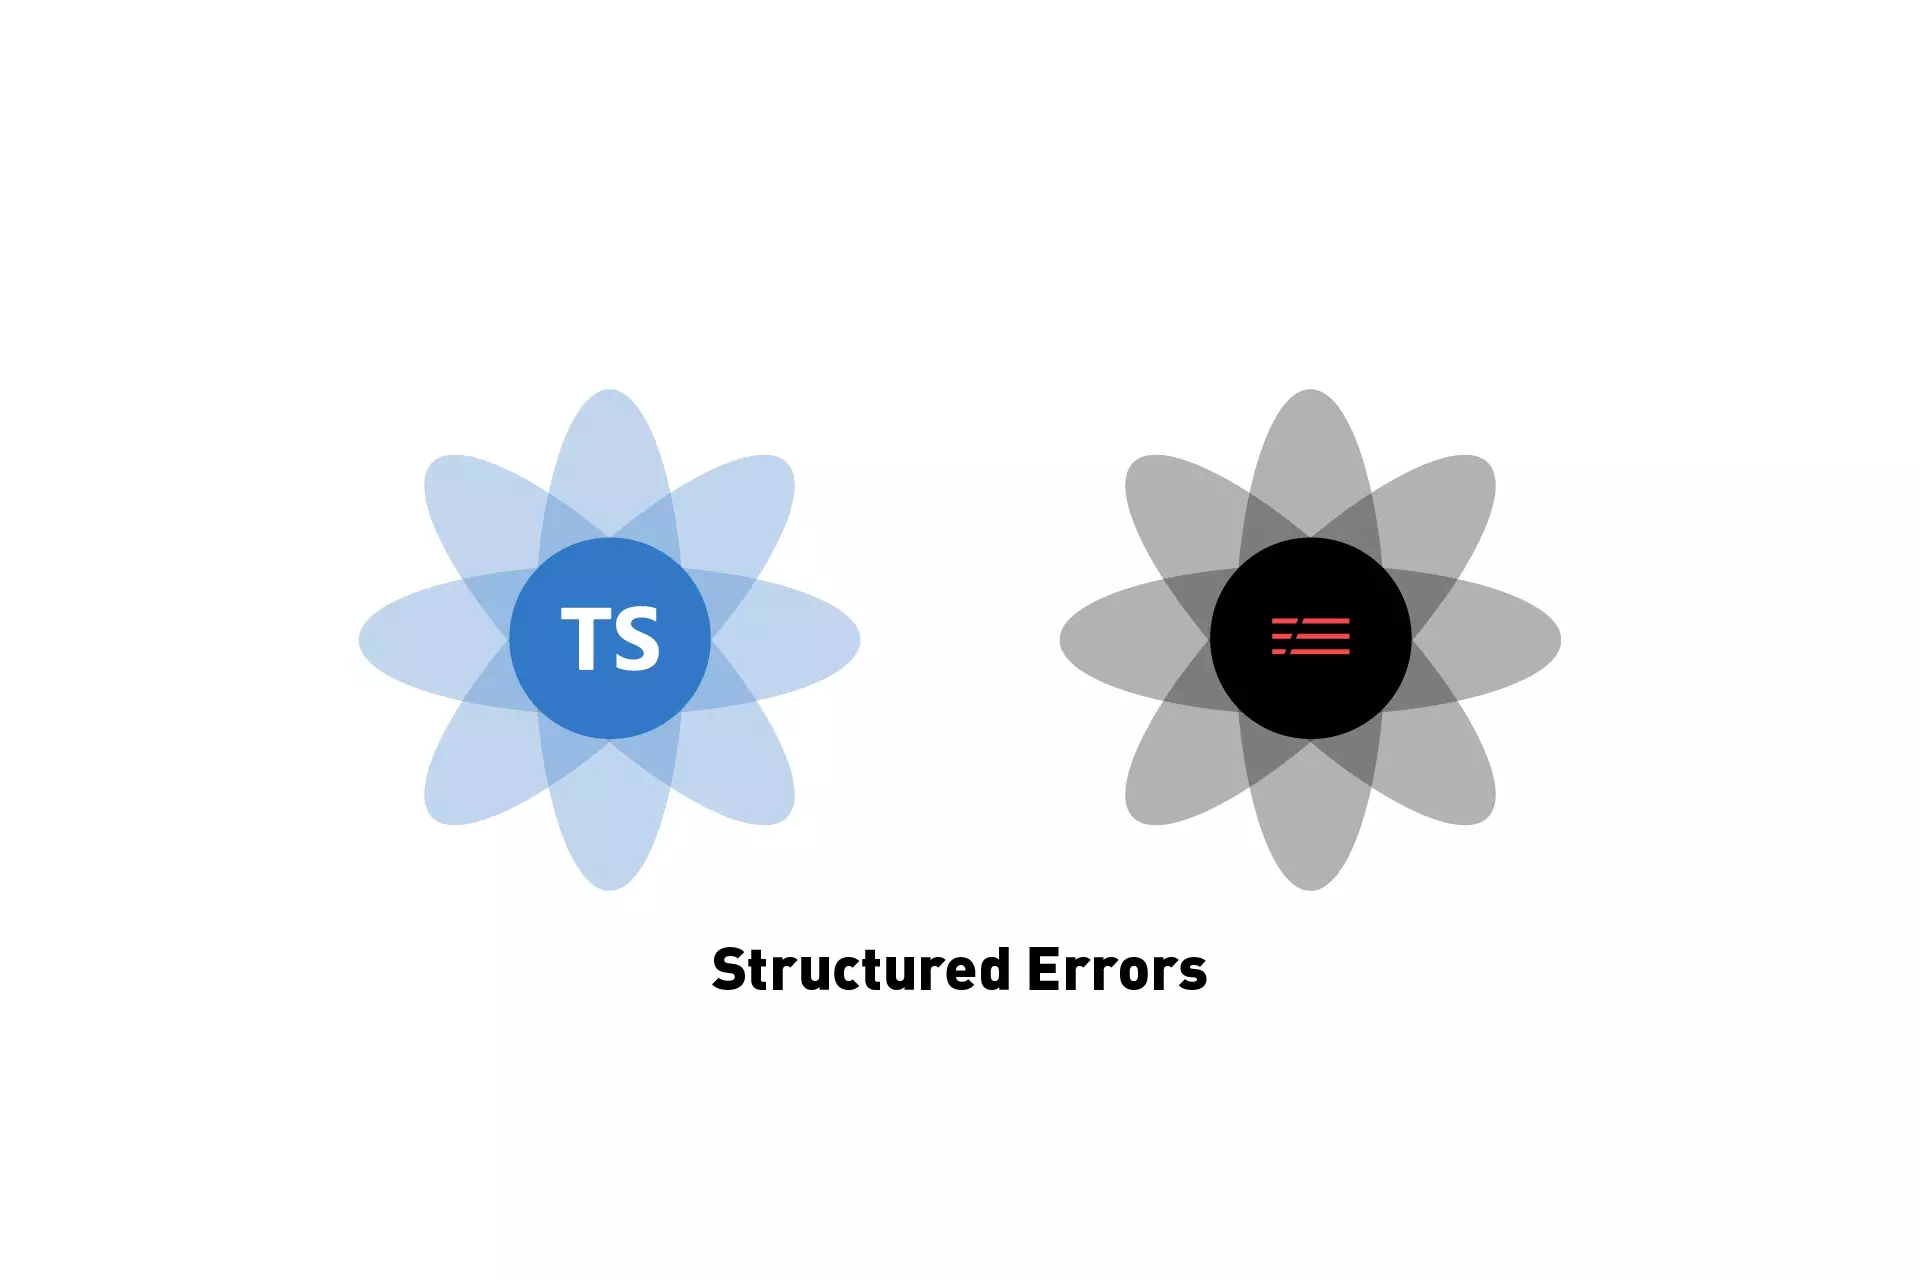 Two flowers that represent Typescript and Serverless side by side. Beneath it sits the text "Structured Errors".